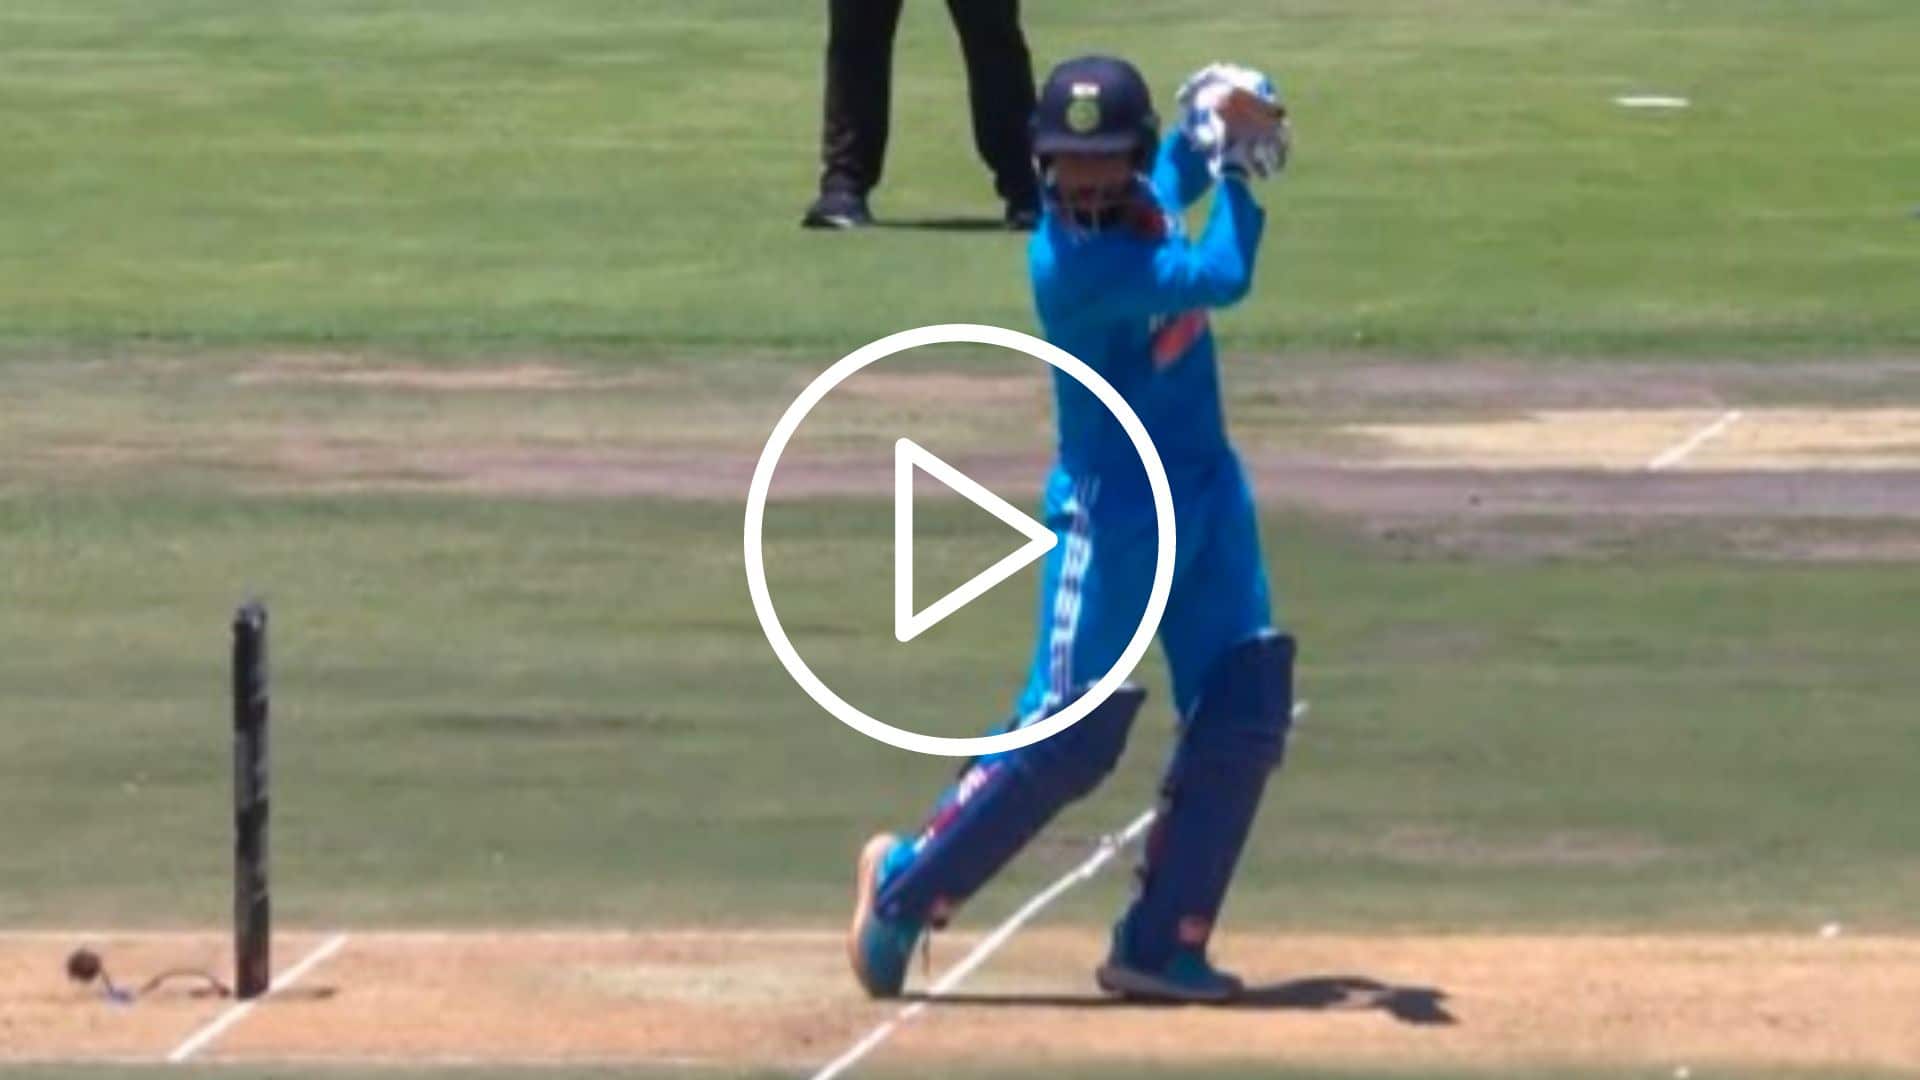 [Watch] Rajat Patidar Packs Picturesque First Boundary On ODI Debut vs South Africa